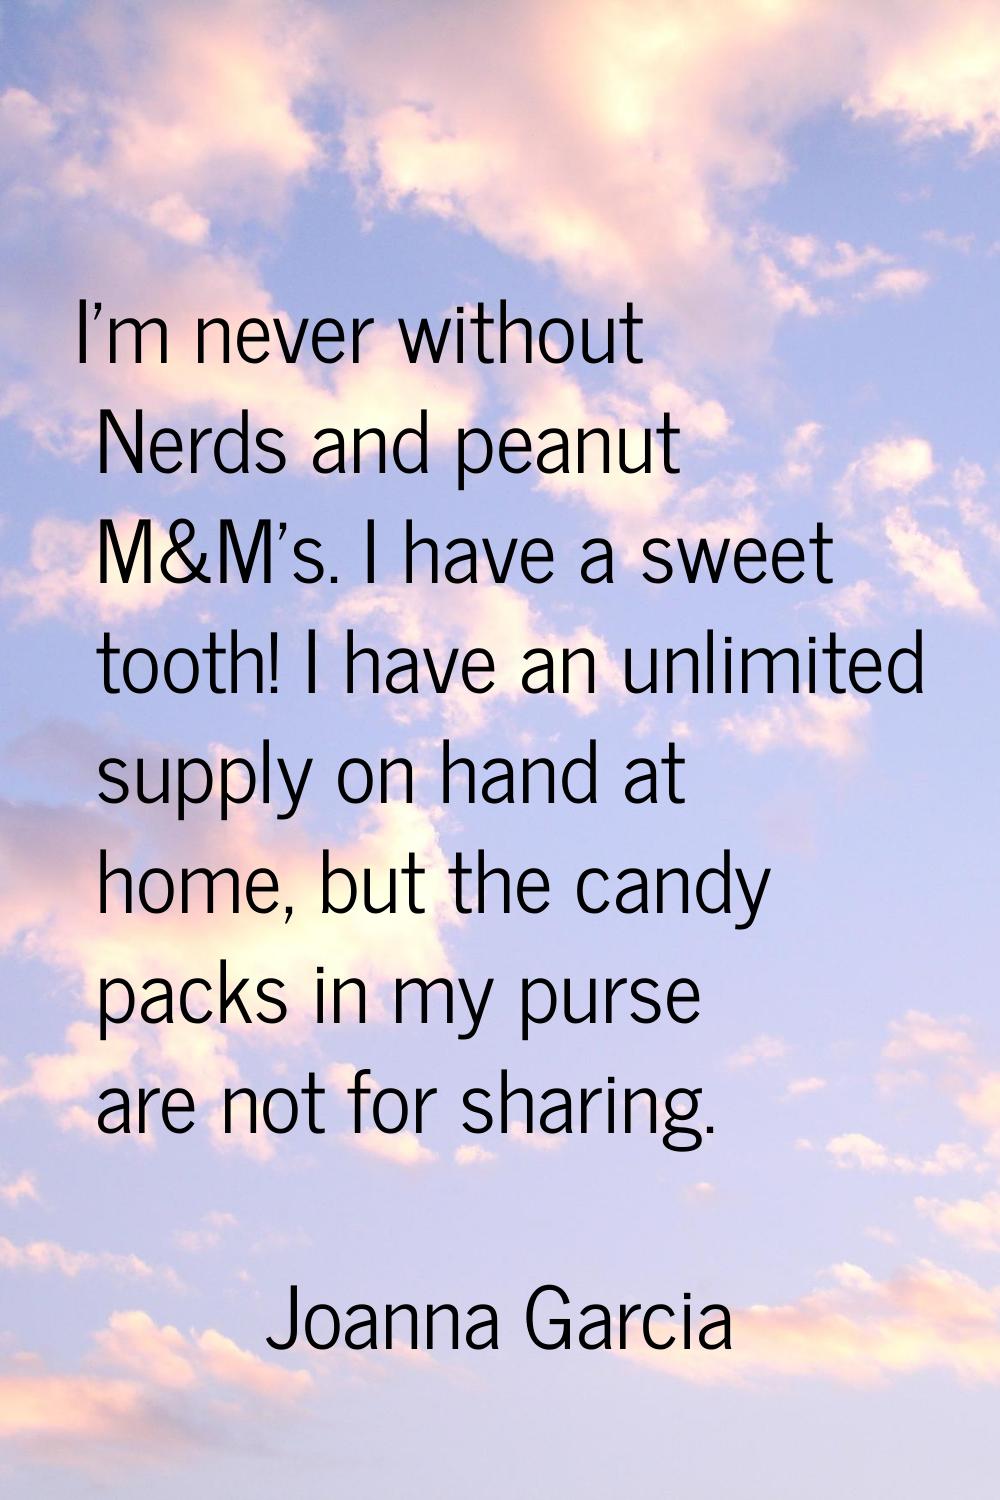 I'm never without Nerds and peanut M&M's. I have a sweet tooth! I have an unlimited supply on hand 